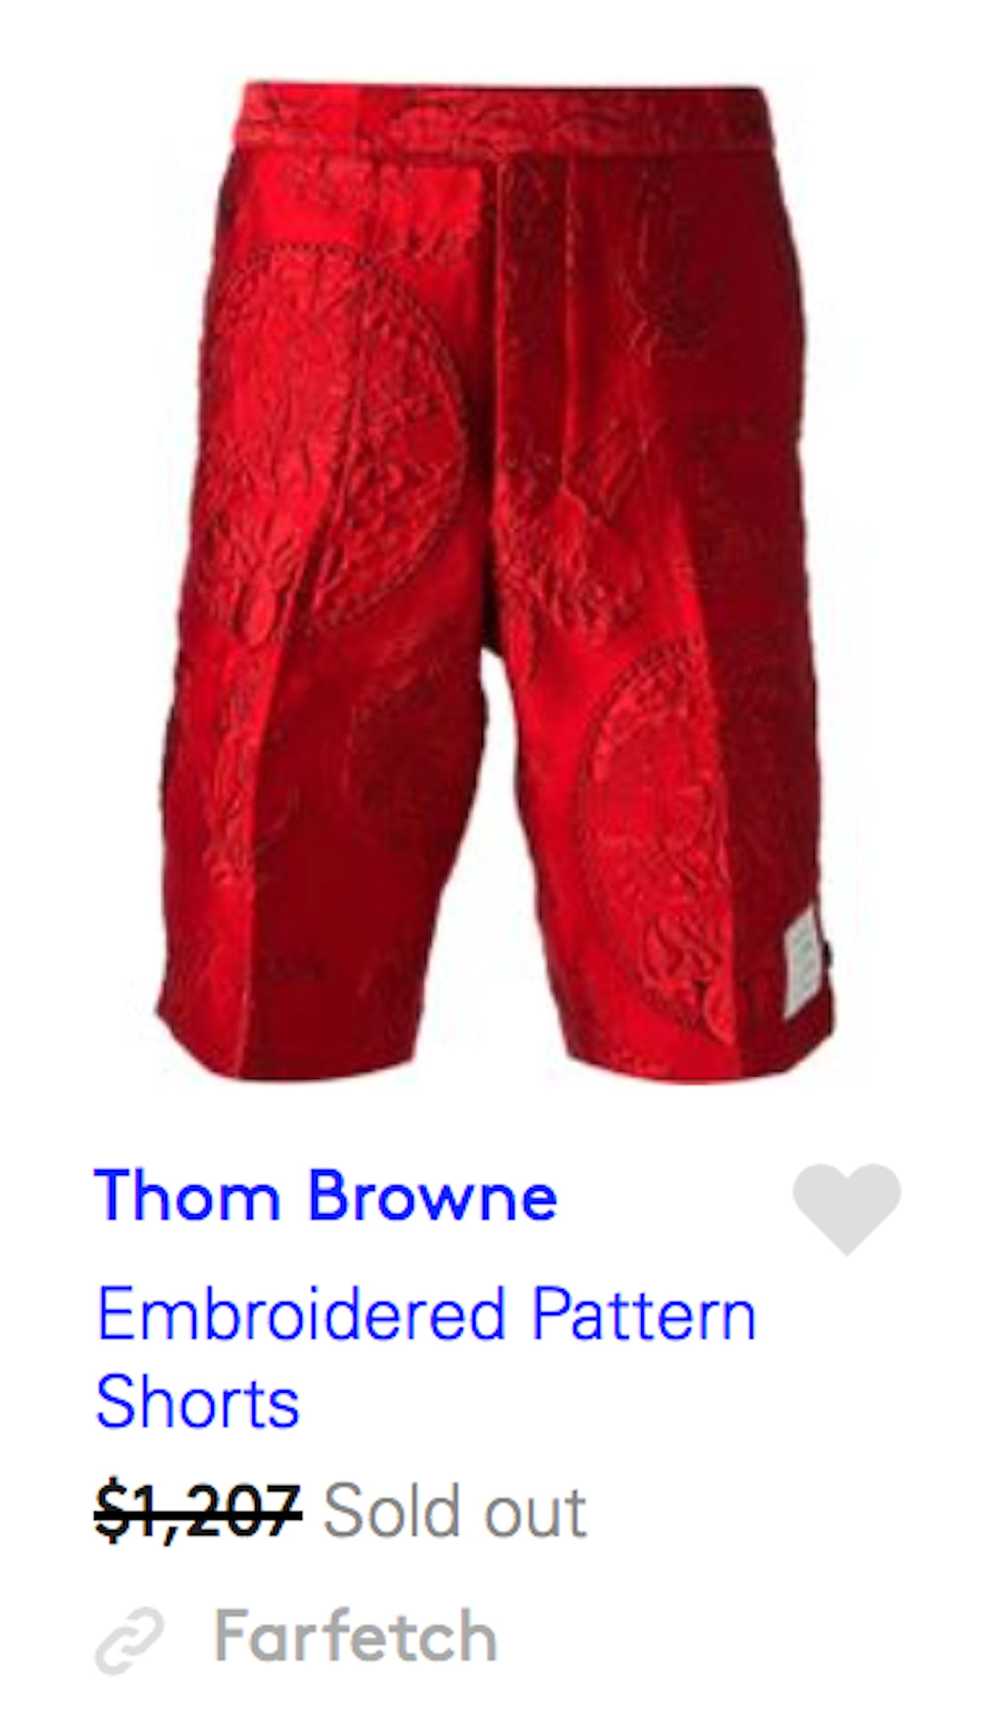 Thom Browne $1,207 embroidered red shorts - image 1